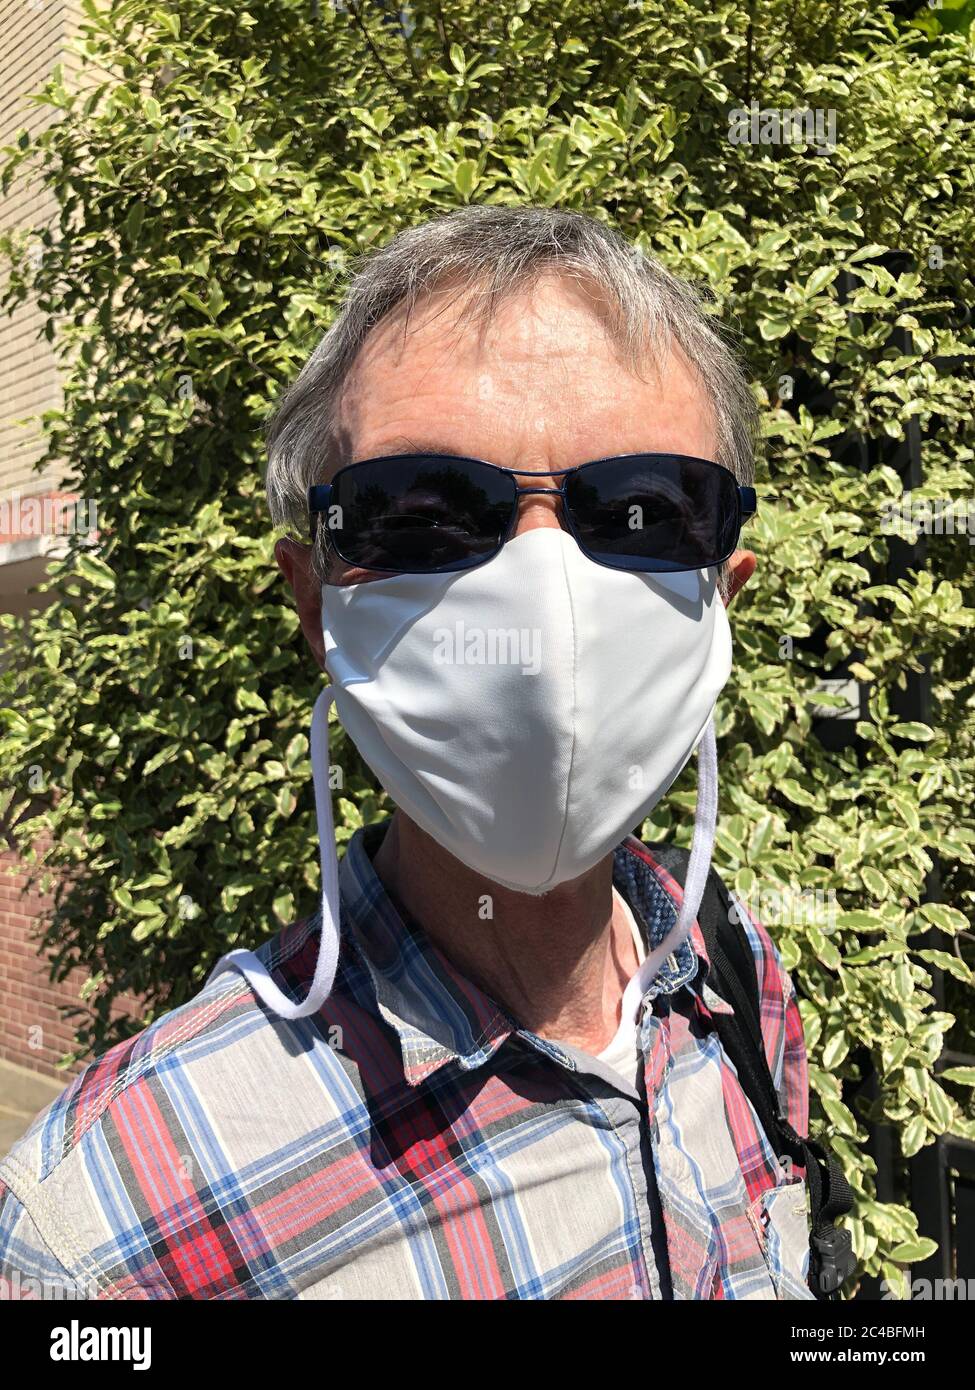 Protective mask during the pandemic of covid-19. Stock Photo